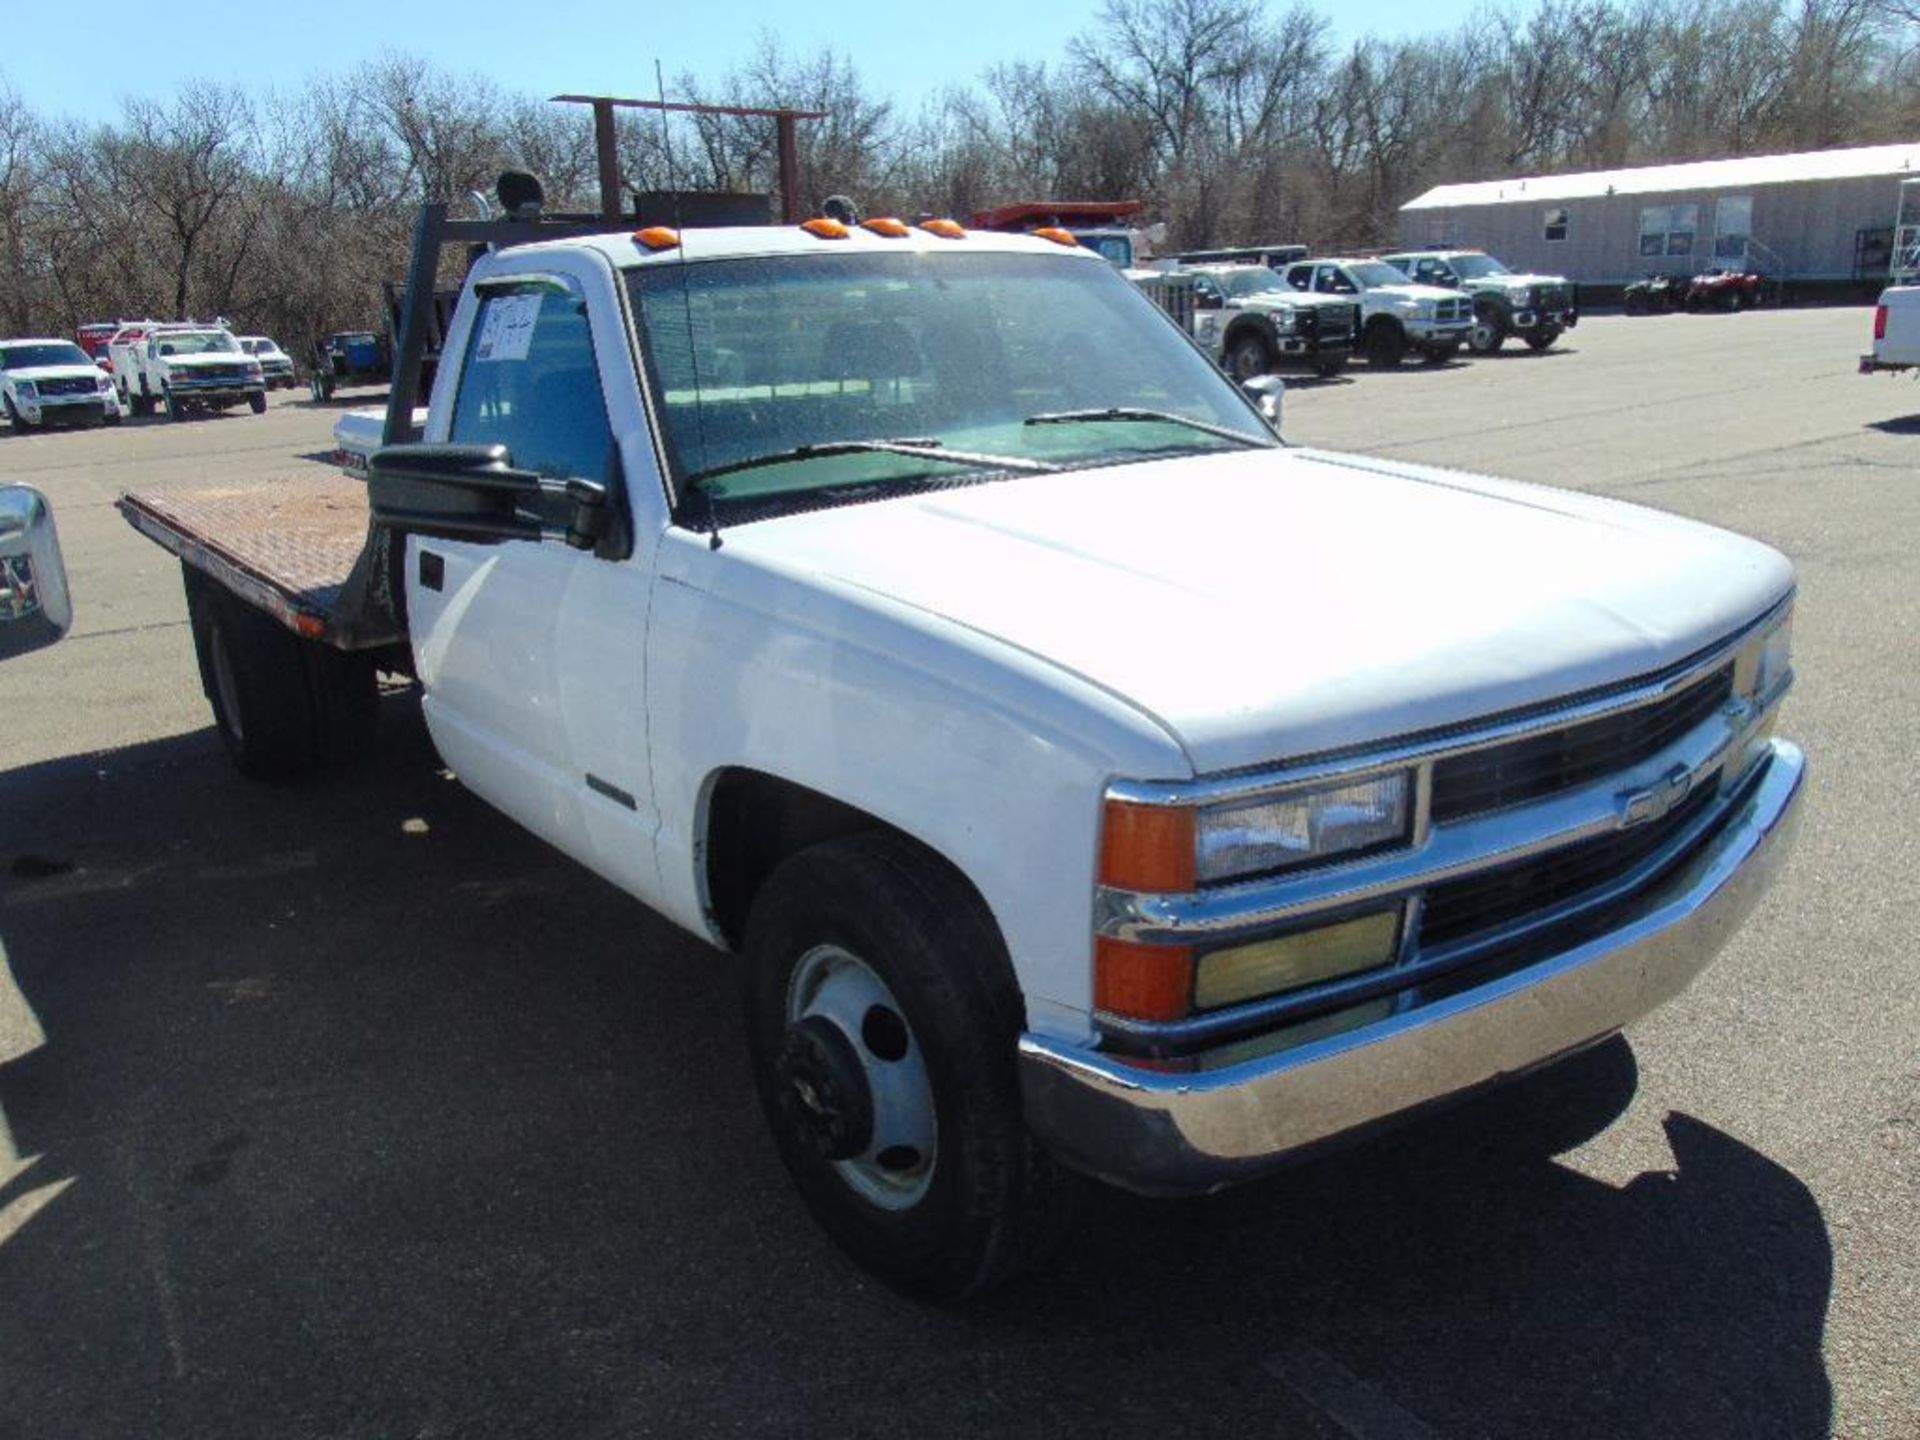 1997 Chevrolet 3500 Flatbed Truck s/n 1gbjc34j1vf018323, v8 eng, auto trans ,od reads 181092 miles - Image 4 of 6